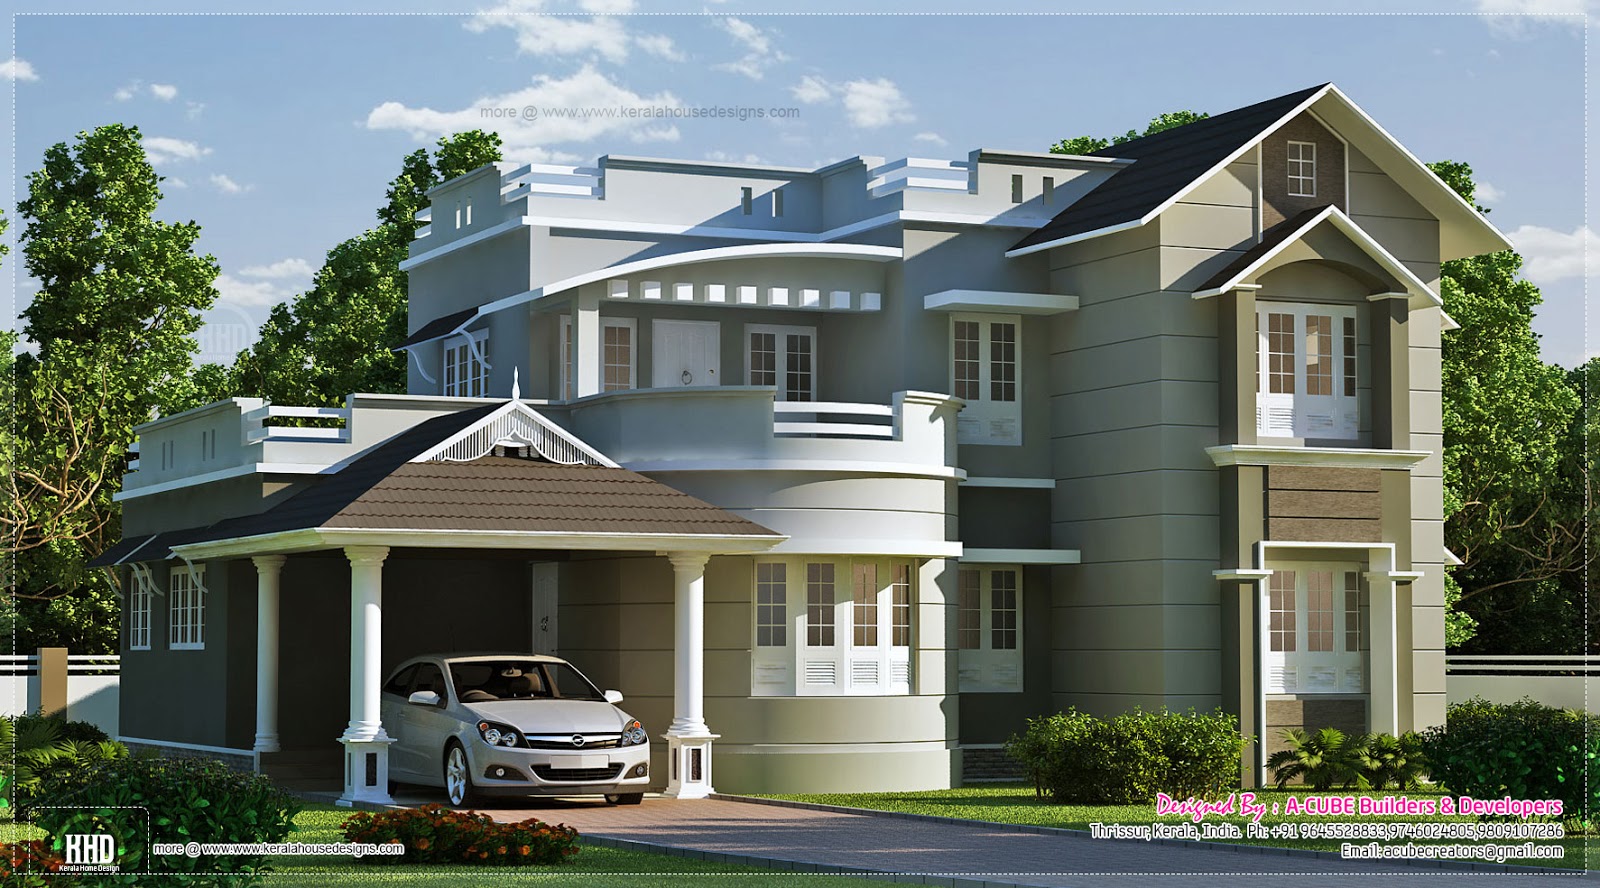  New  style kerala  home  elevation indianhomemakeover com